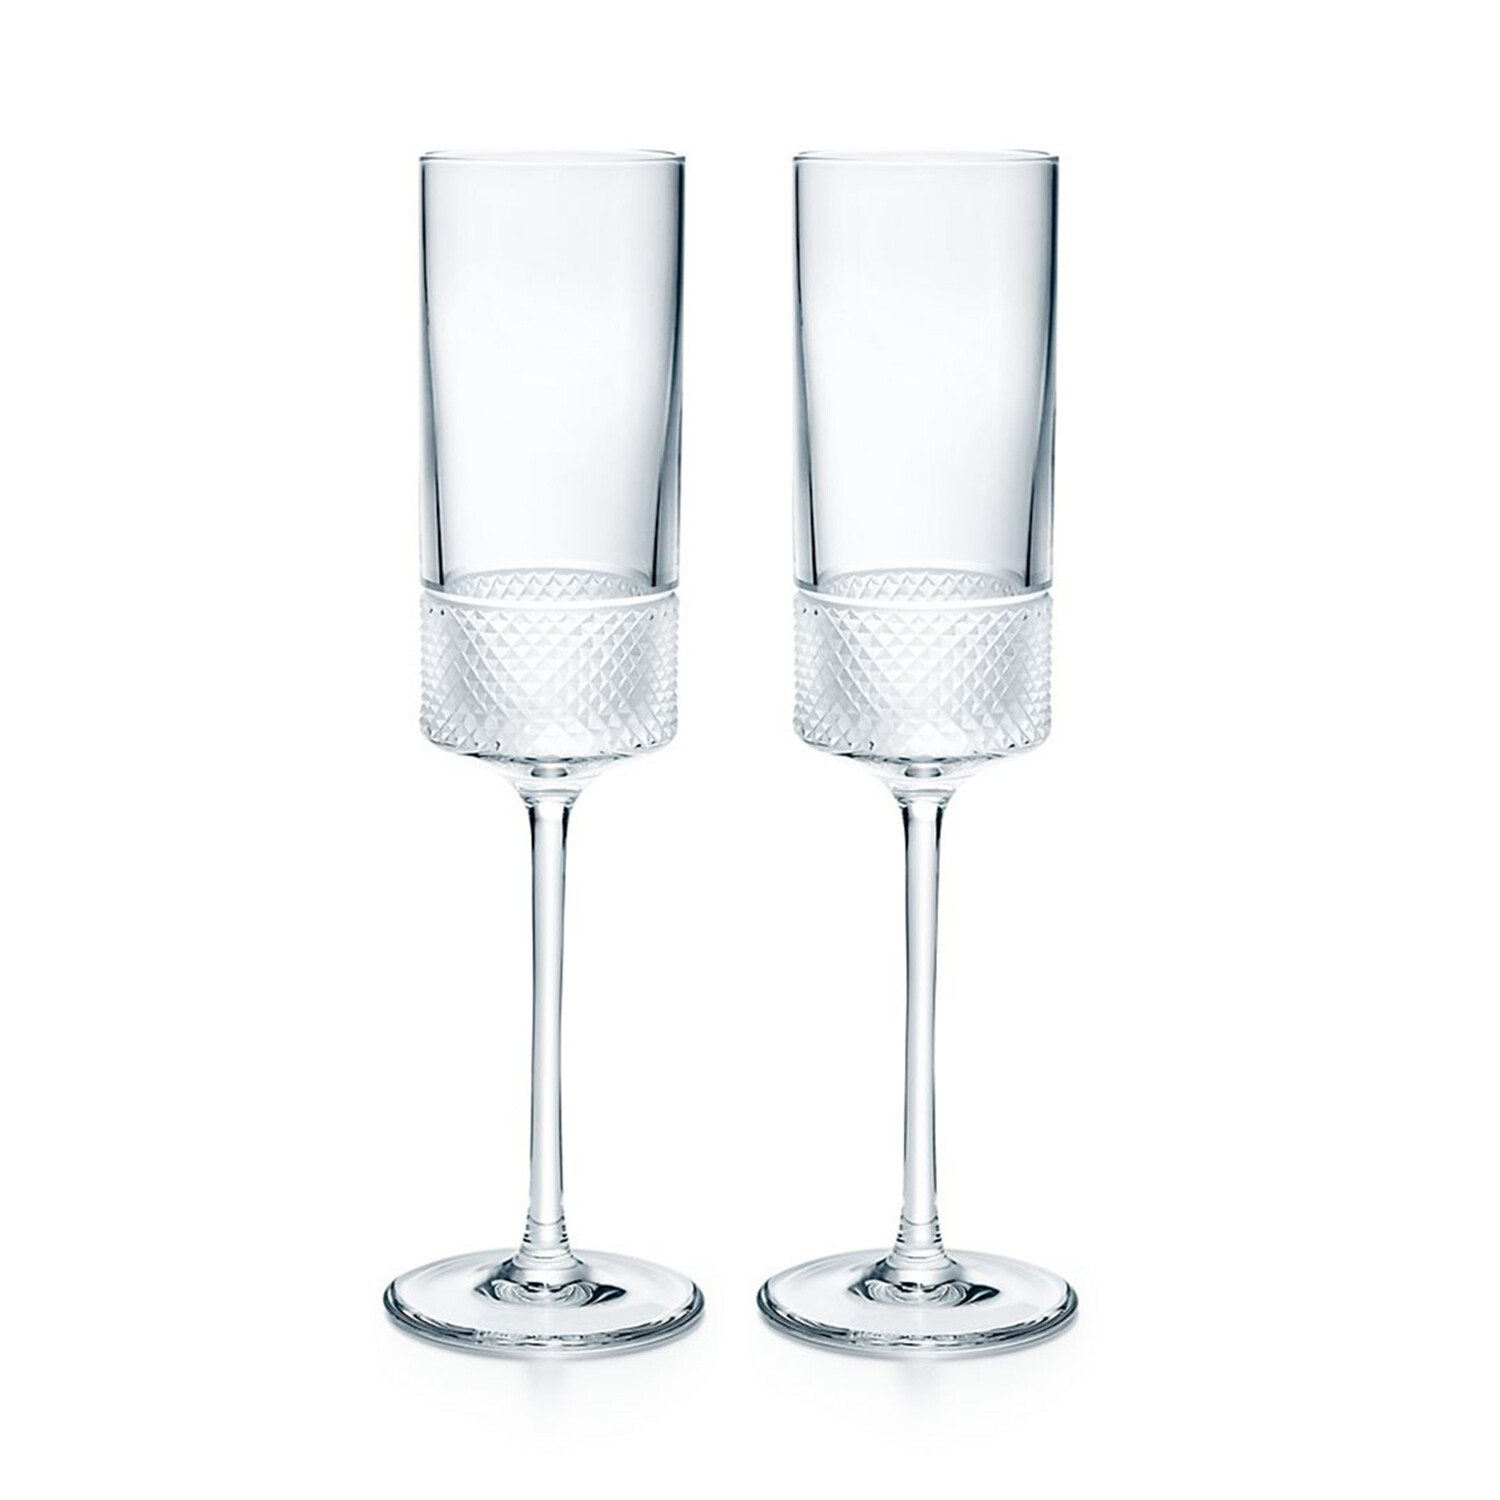 Mine & Yours Champagne Flute Glasses - Set of 2